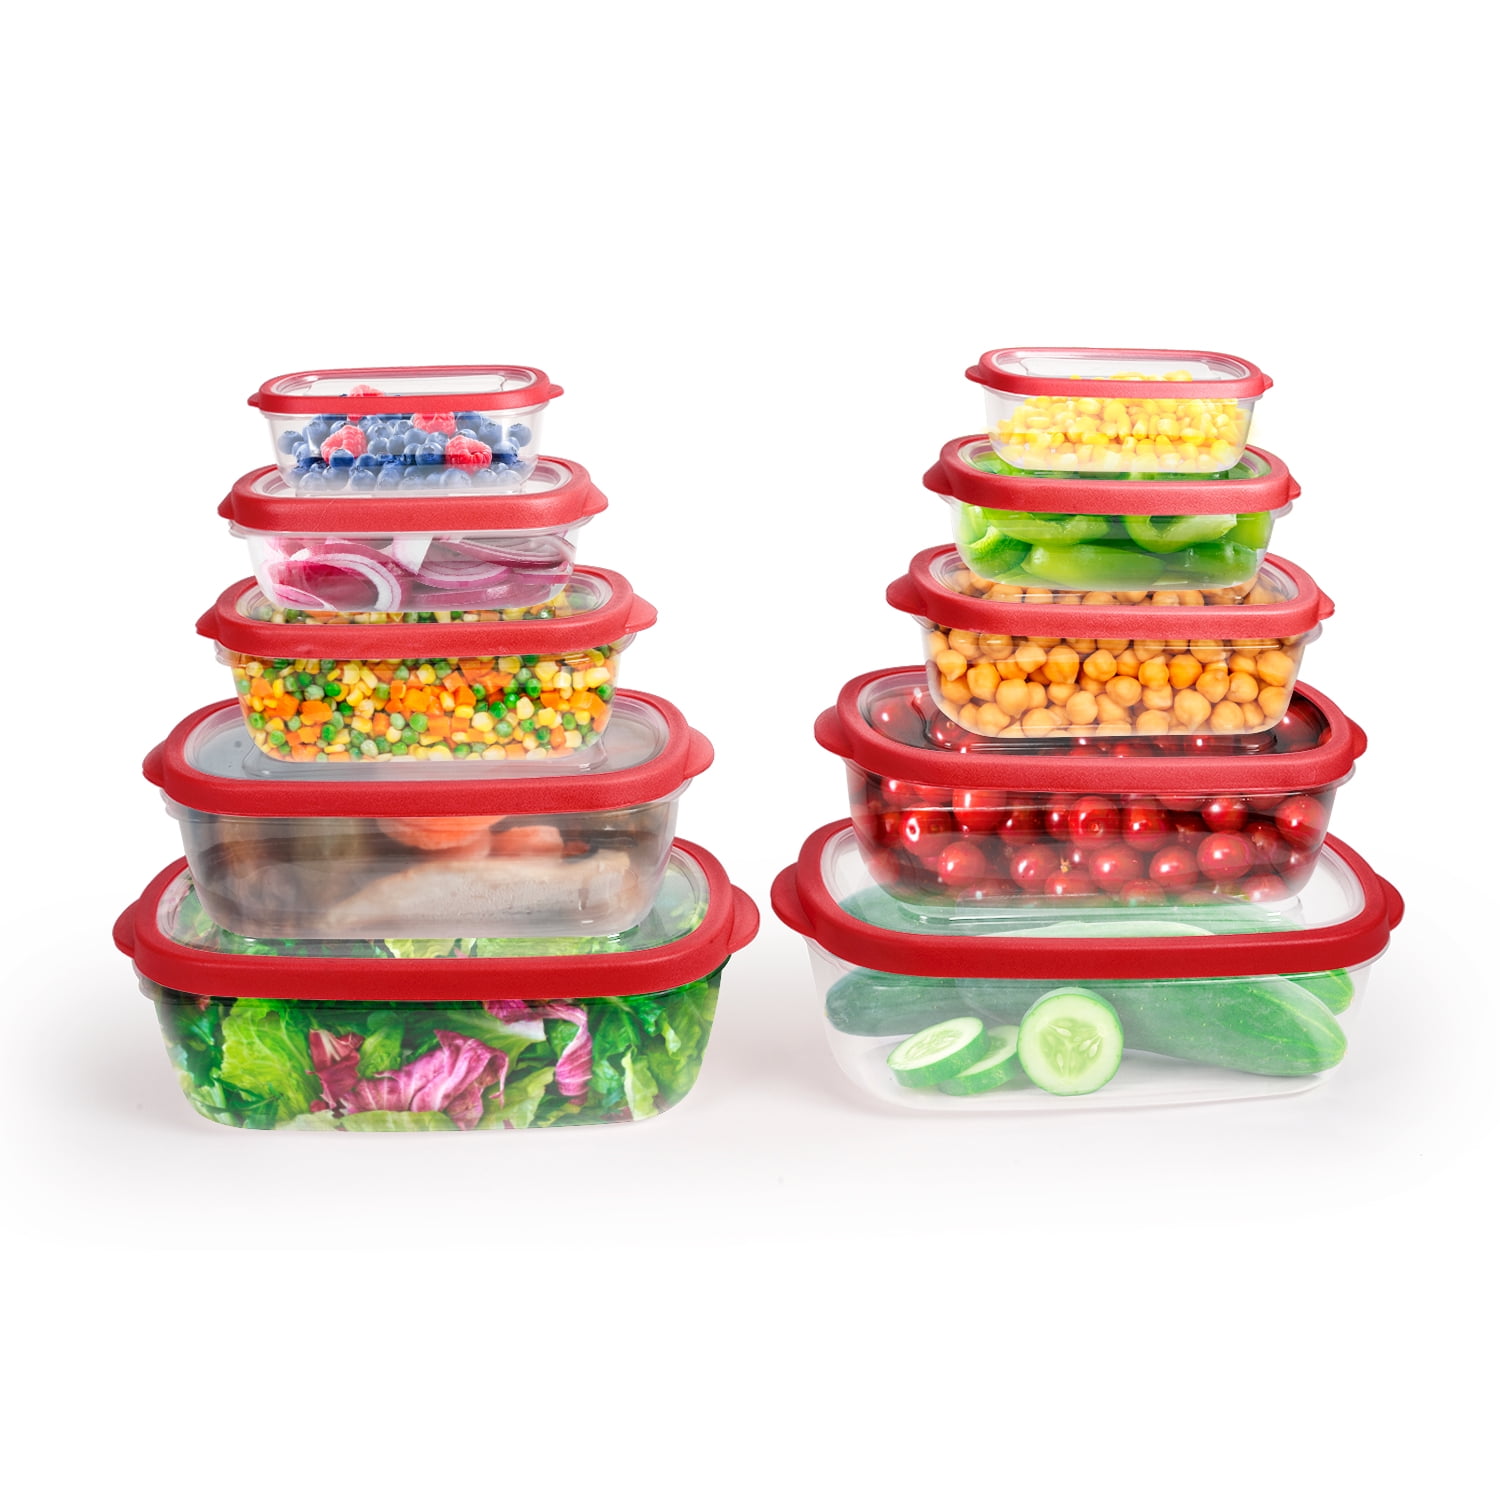  BERAJASTORE plastic food containers with lids - 3pcs fridge  storage containers - toppers ware - Reusable & Leftover Lunch Boxes: Home &  Kitchen